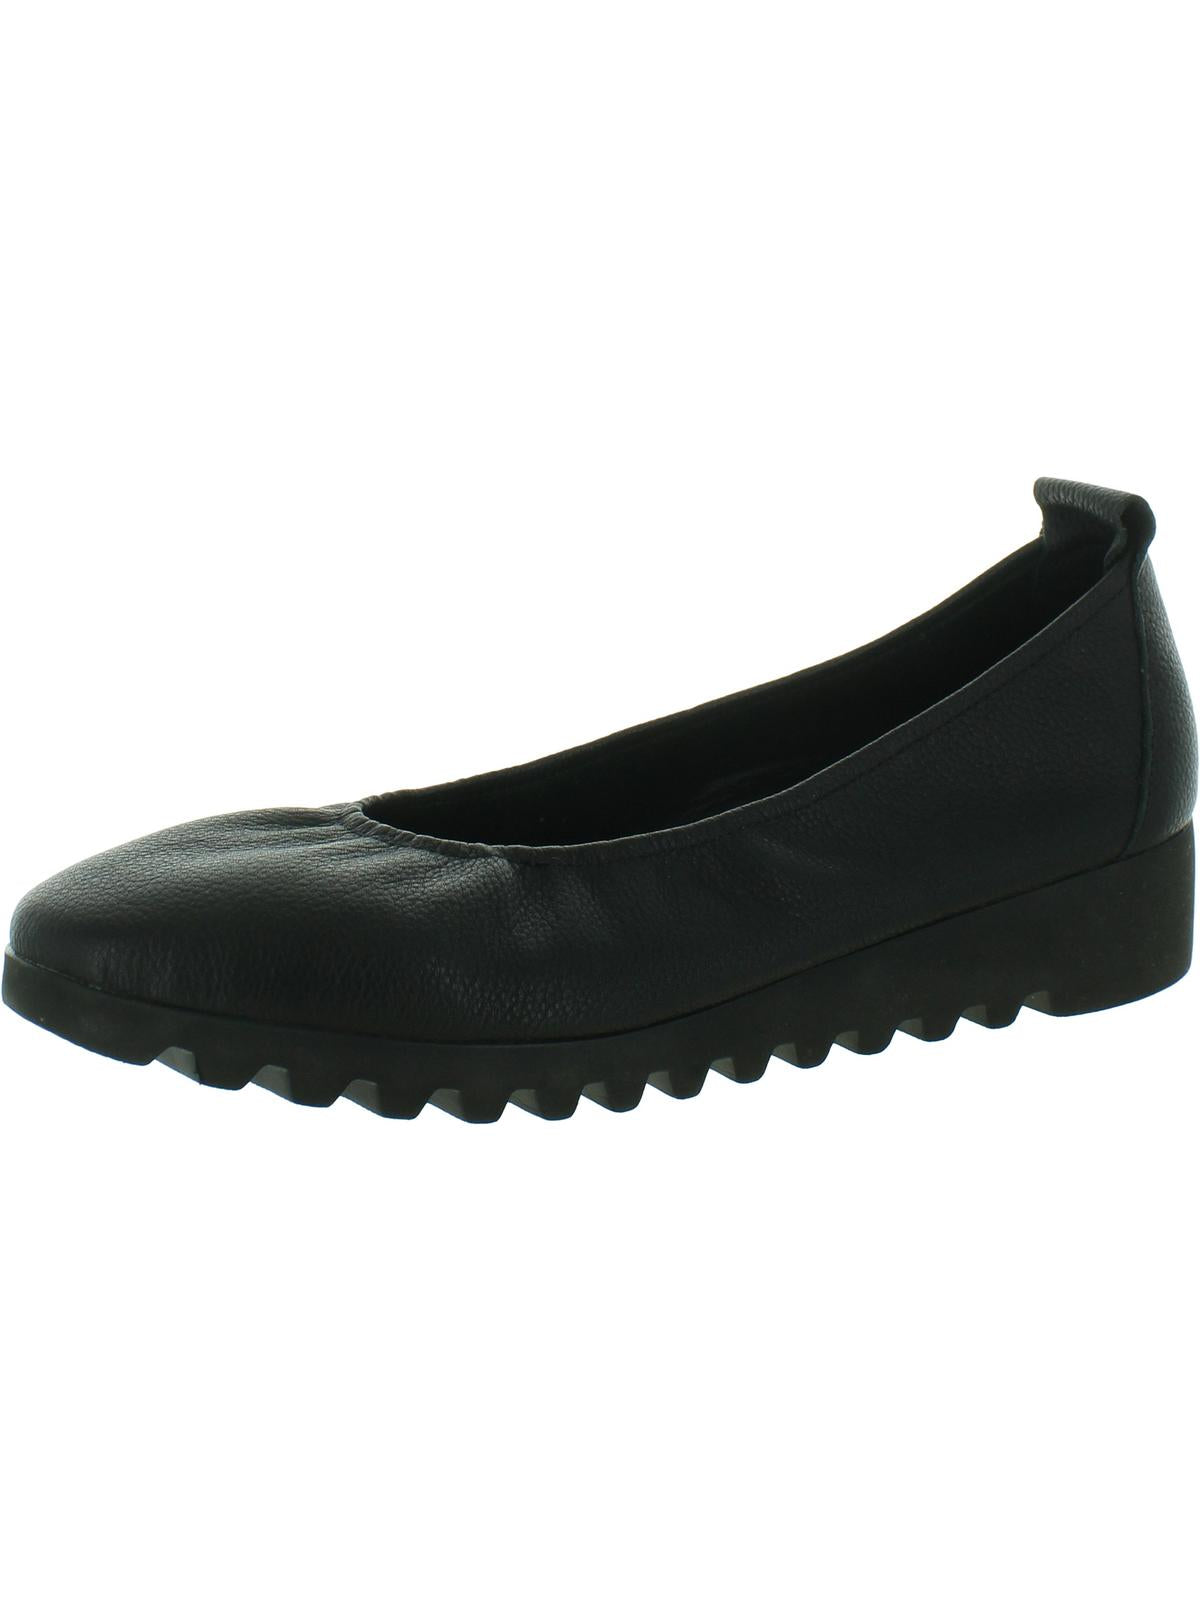 Aetrex Brianna Womens Leather Round Toe Flat Shoes In Black